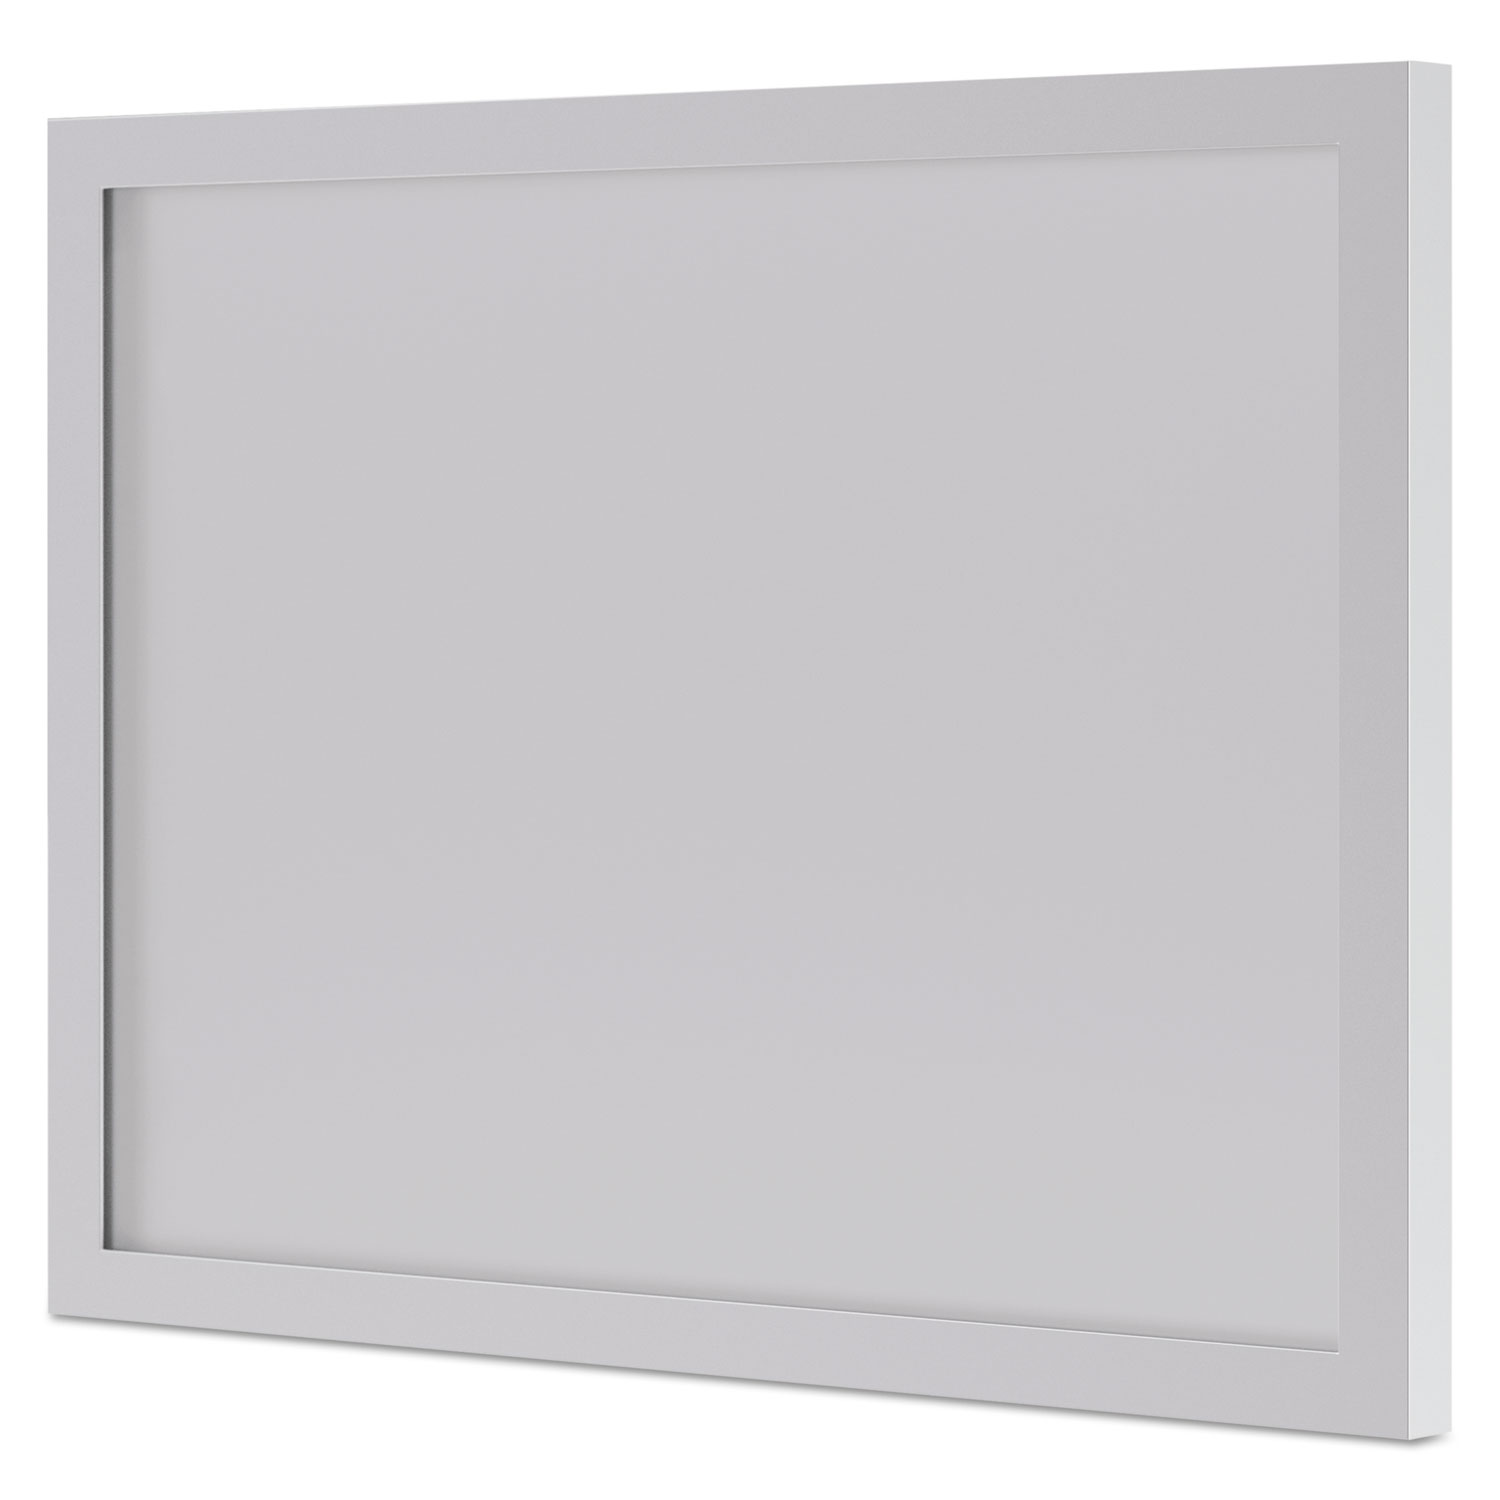 BL Series Frosted Glass Modesty Panel, 39 1/2w x 1/8d x 27 3/8h, Silver/Frosted